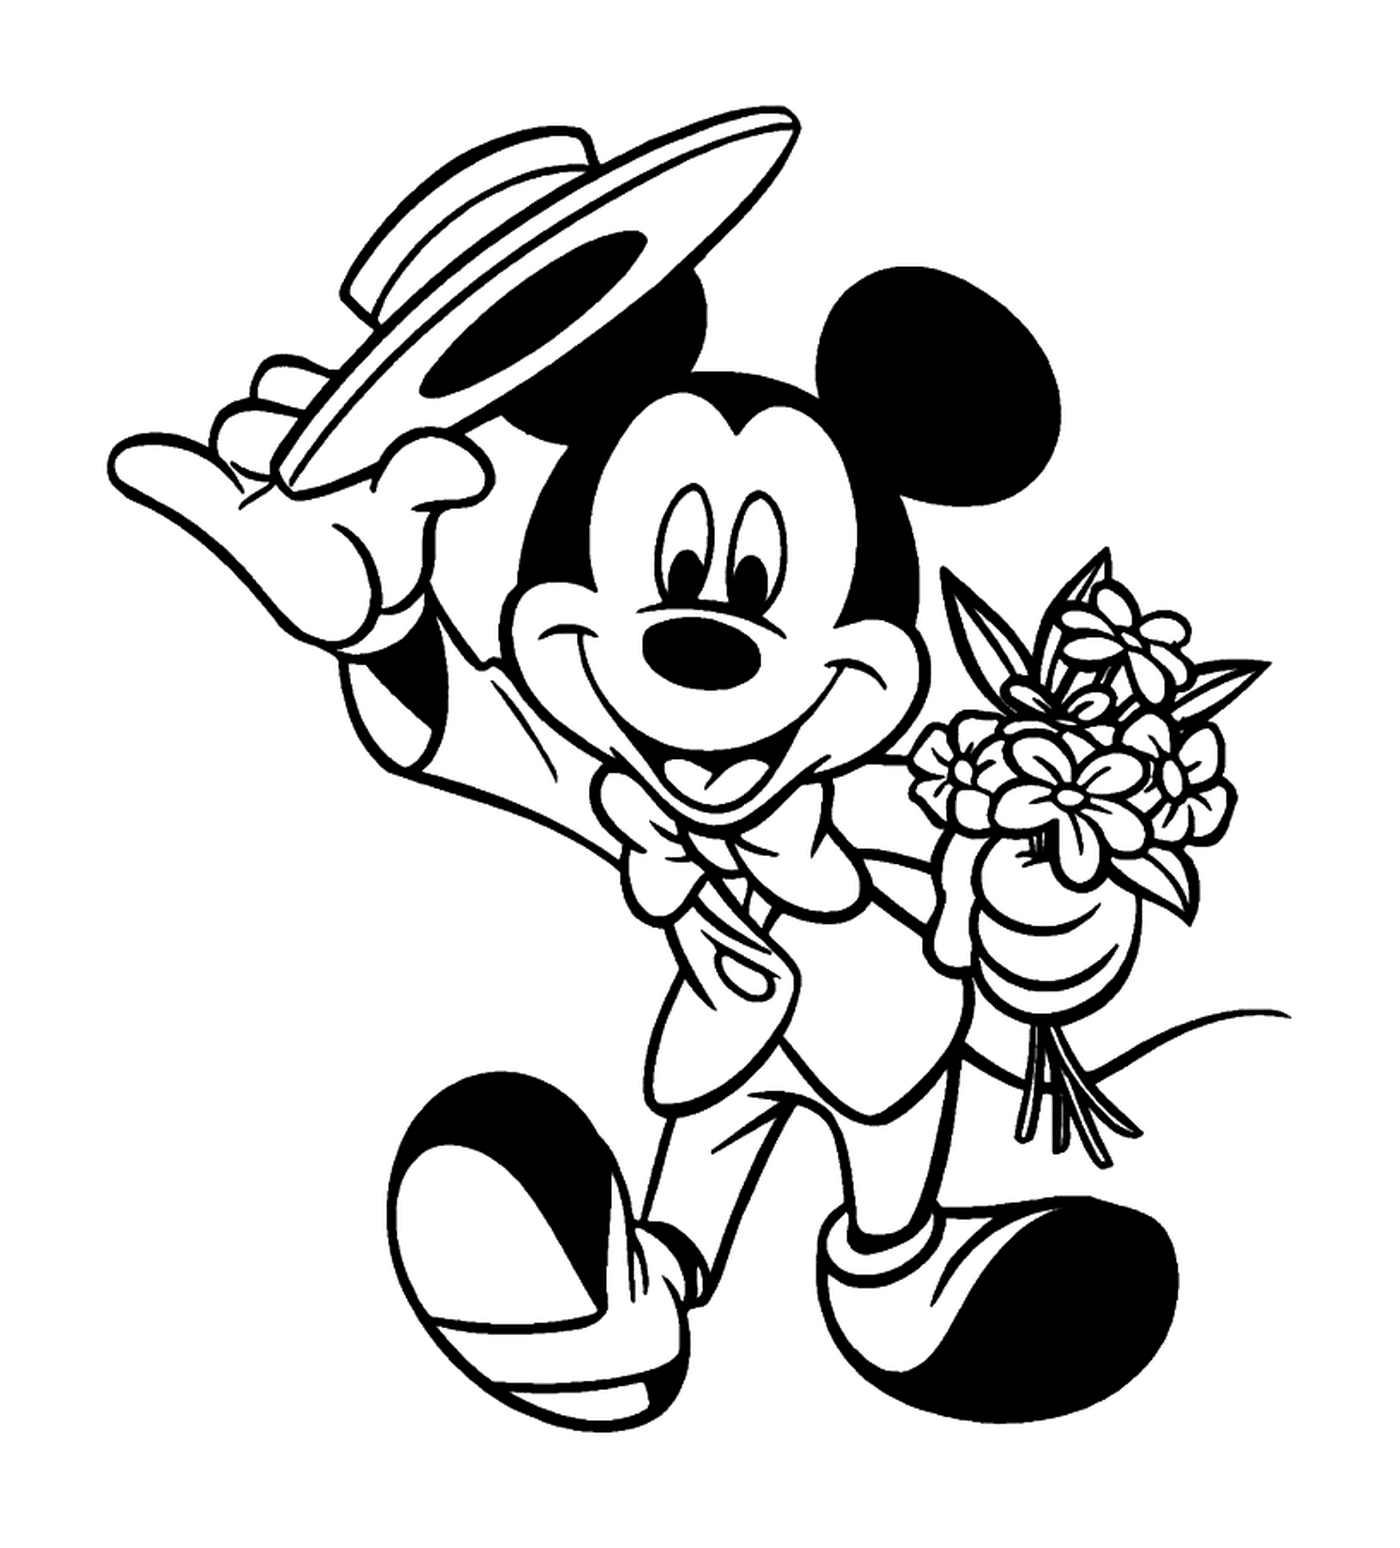  Mickey goes to a gallant date: holding a bouquet 